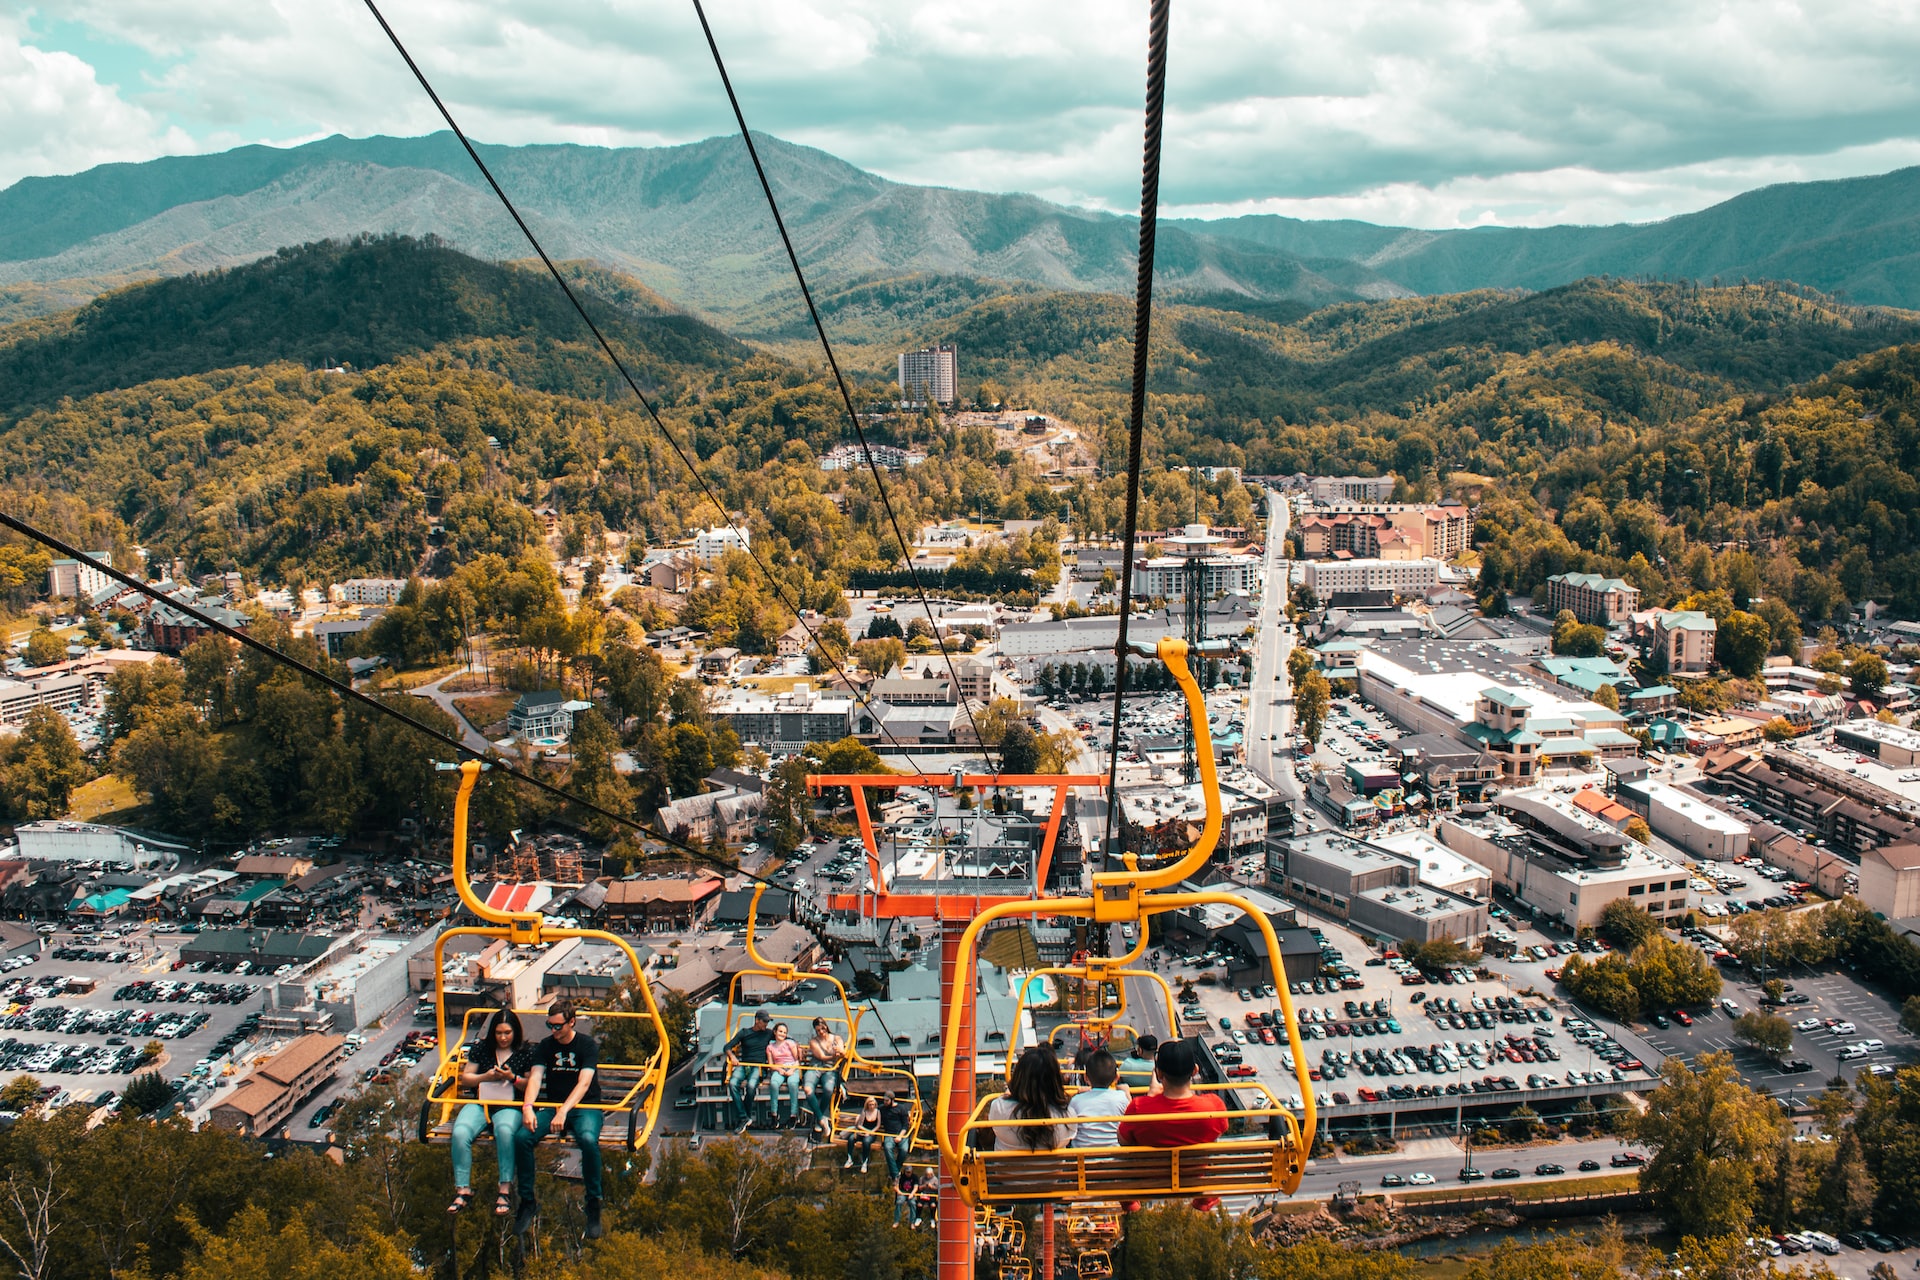 Couples and families riding the chairlift with views of the Smoky Mountains and Pigeon Forge behind them.